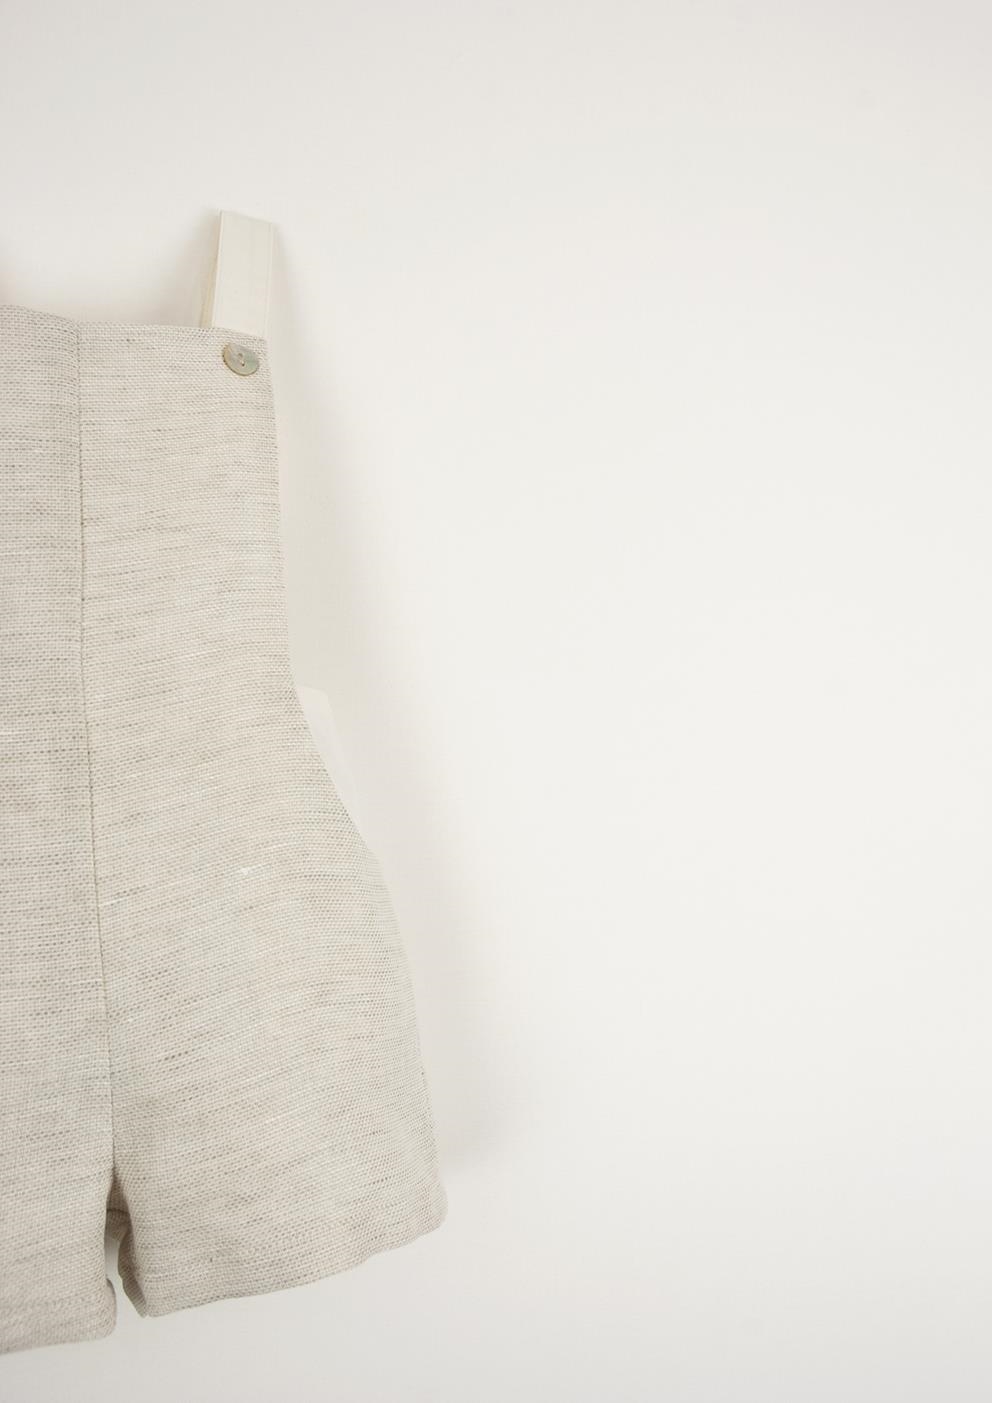 Mod.14.4 Dungarees in a neutral colour | SS23 Mod.14.4 Dungarees in a neutral colour